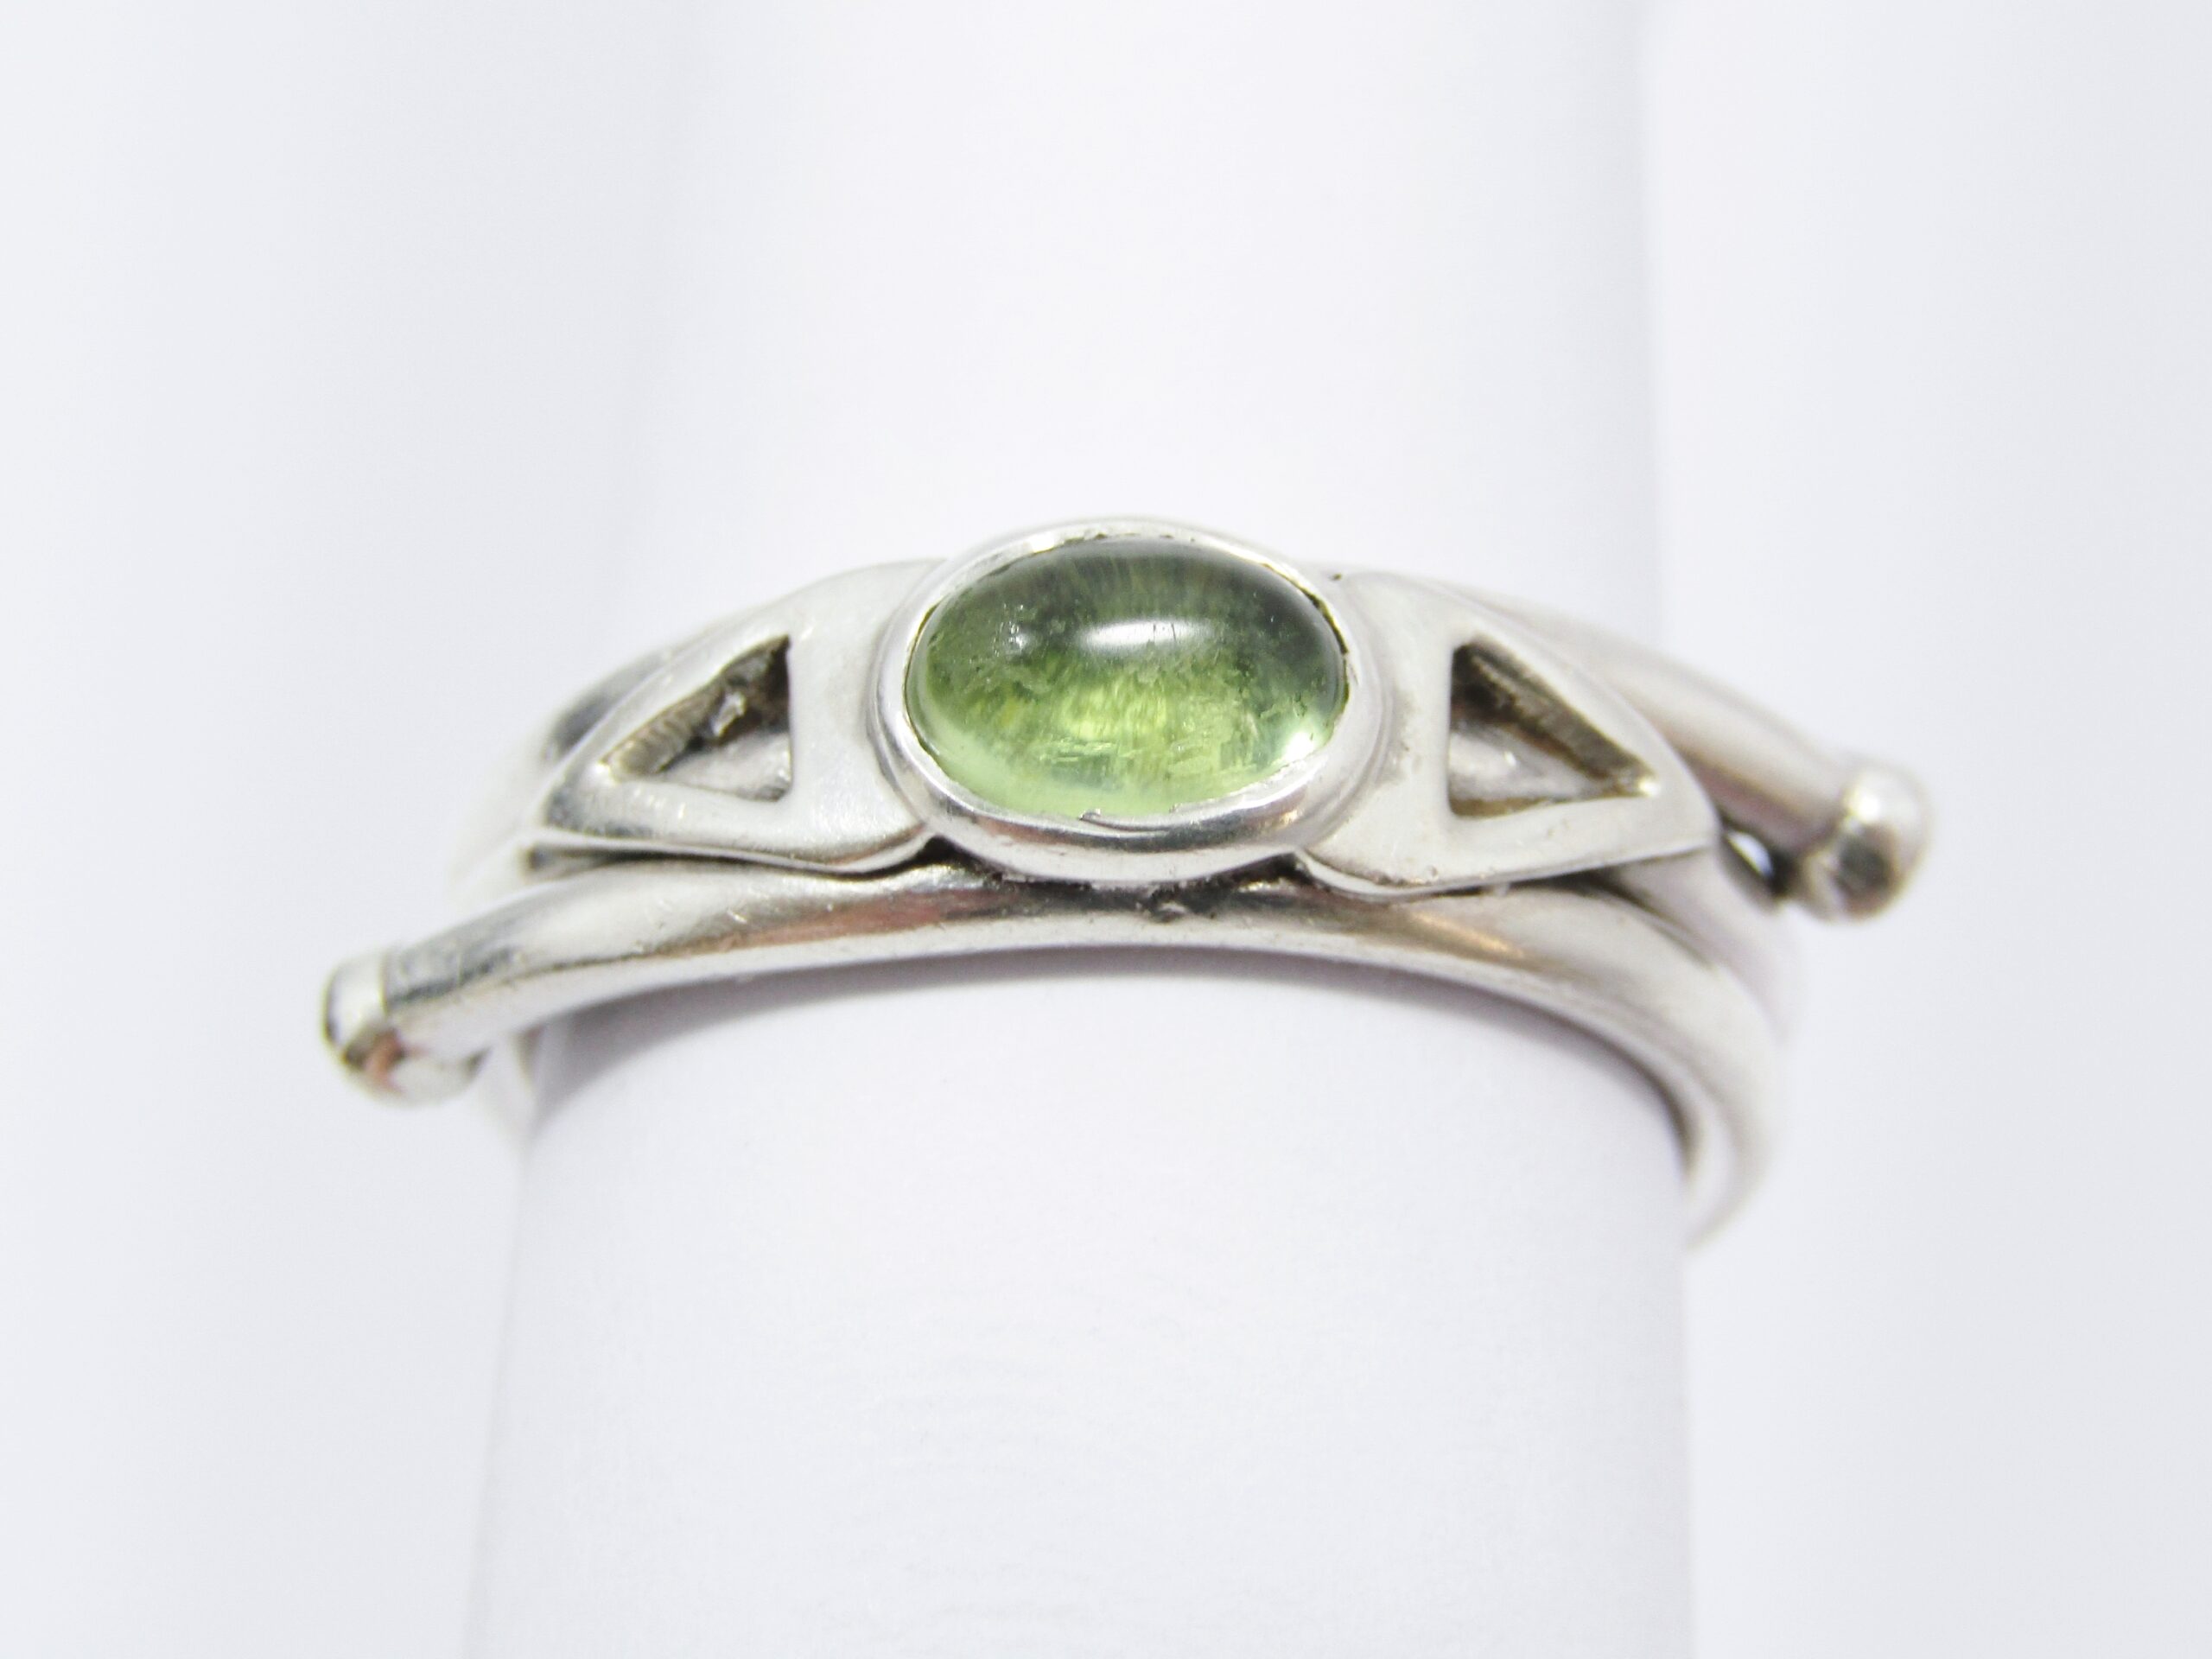 A Bespoke Wrap Around Rand Ring With a Cabochon Peridot Ring in Sterling Silver